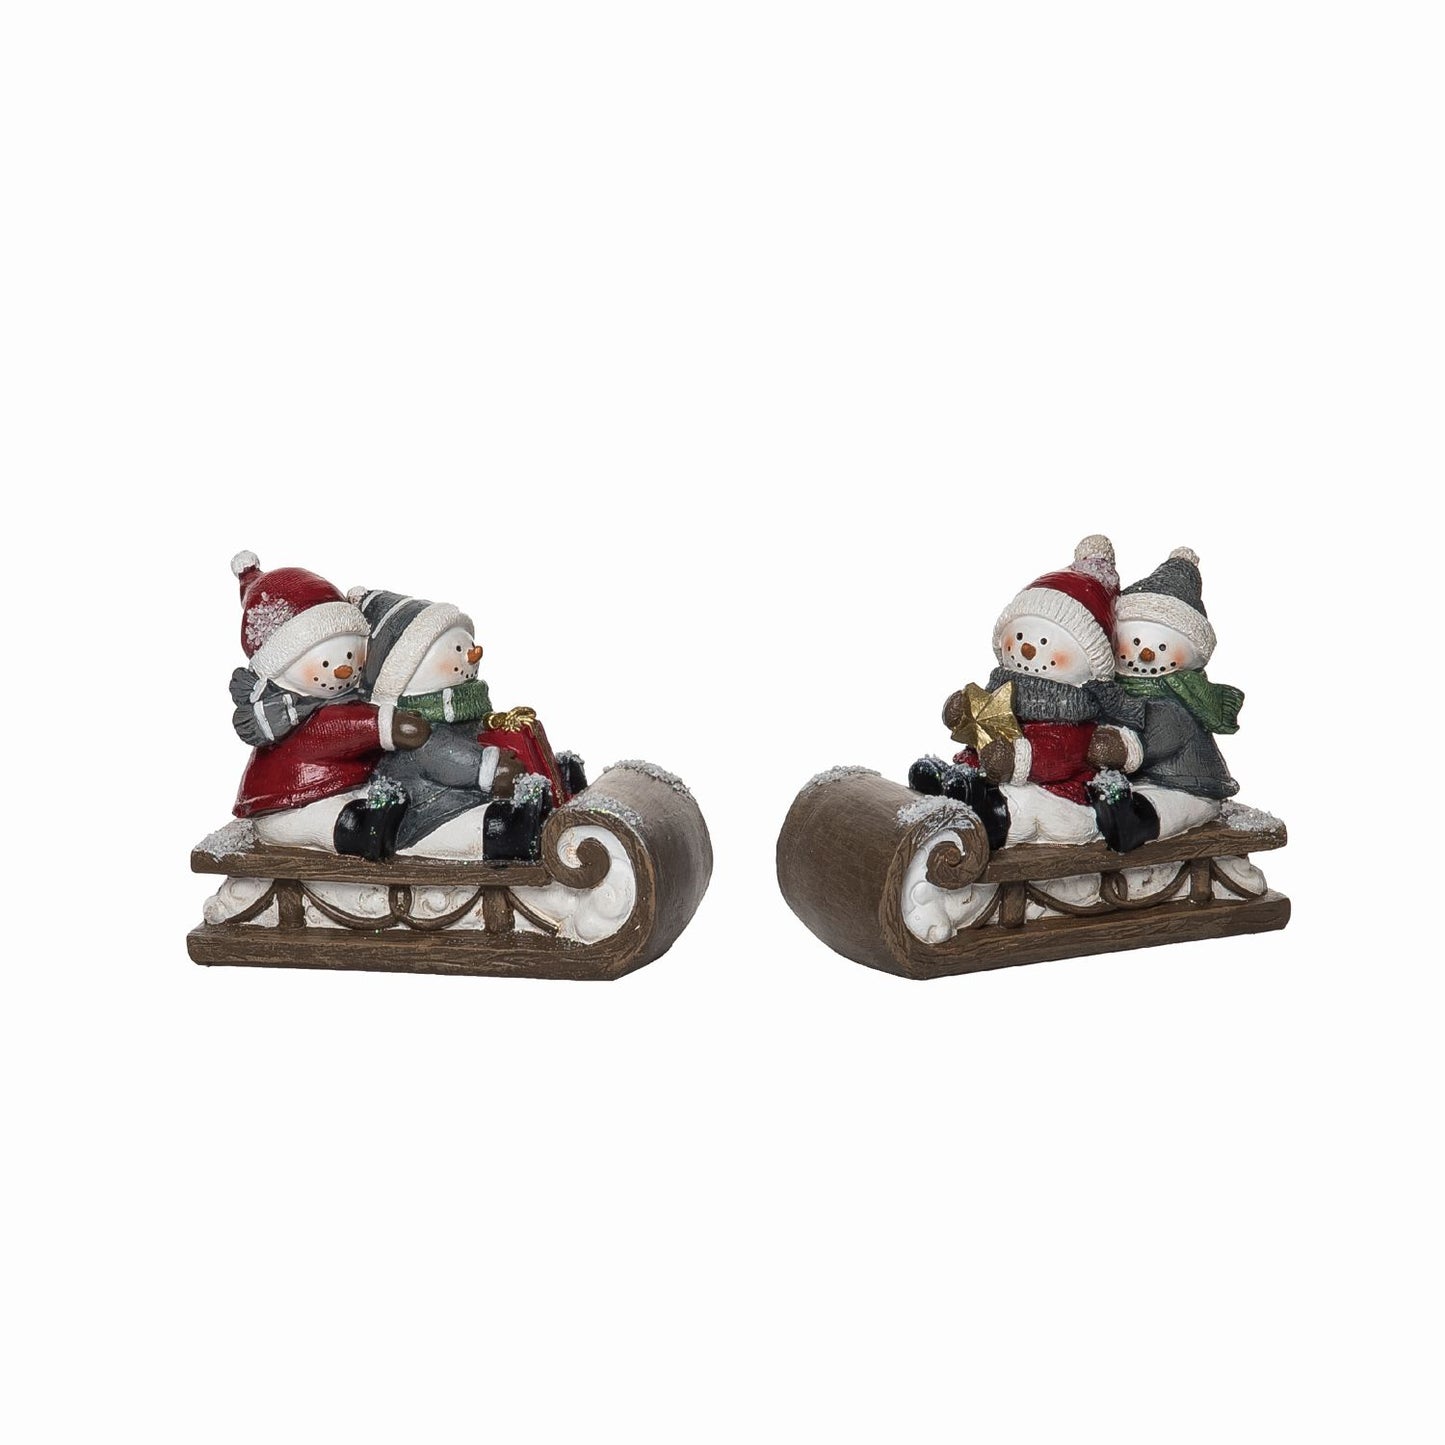 Transpac Resin Quilted Snowman Sledding Figurine, Set Of 2, Assortment